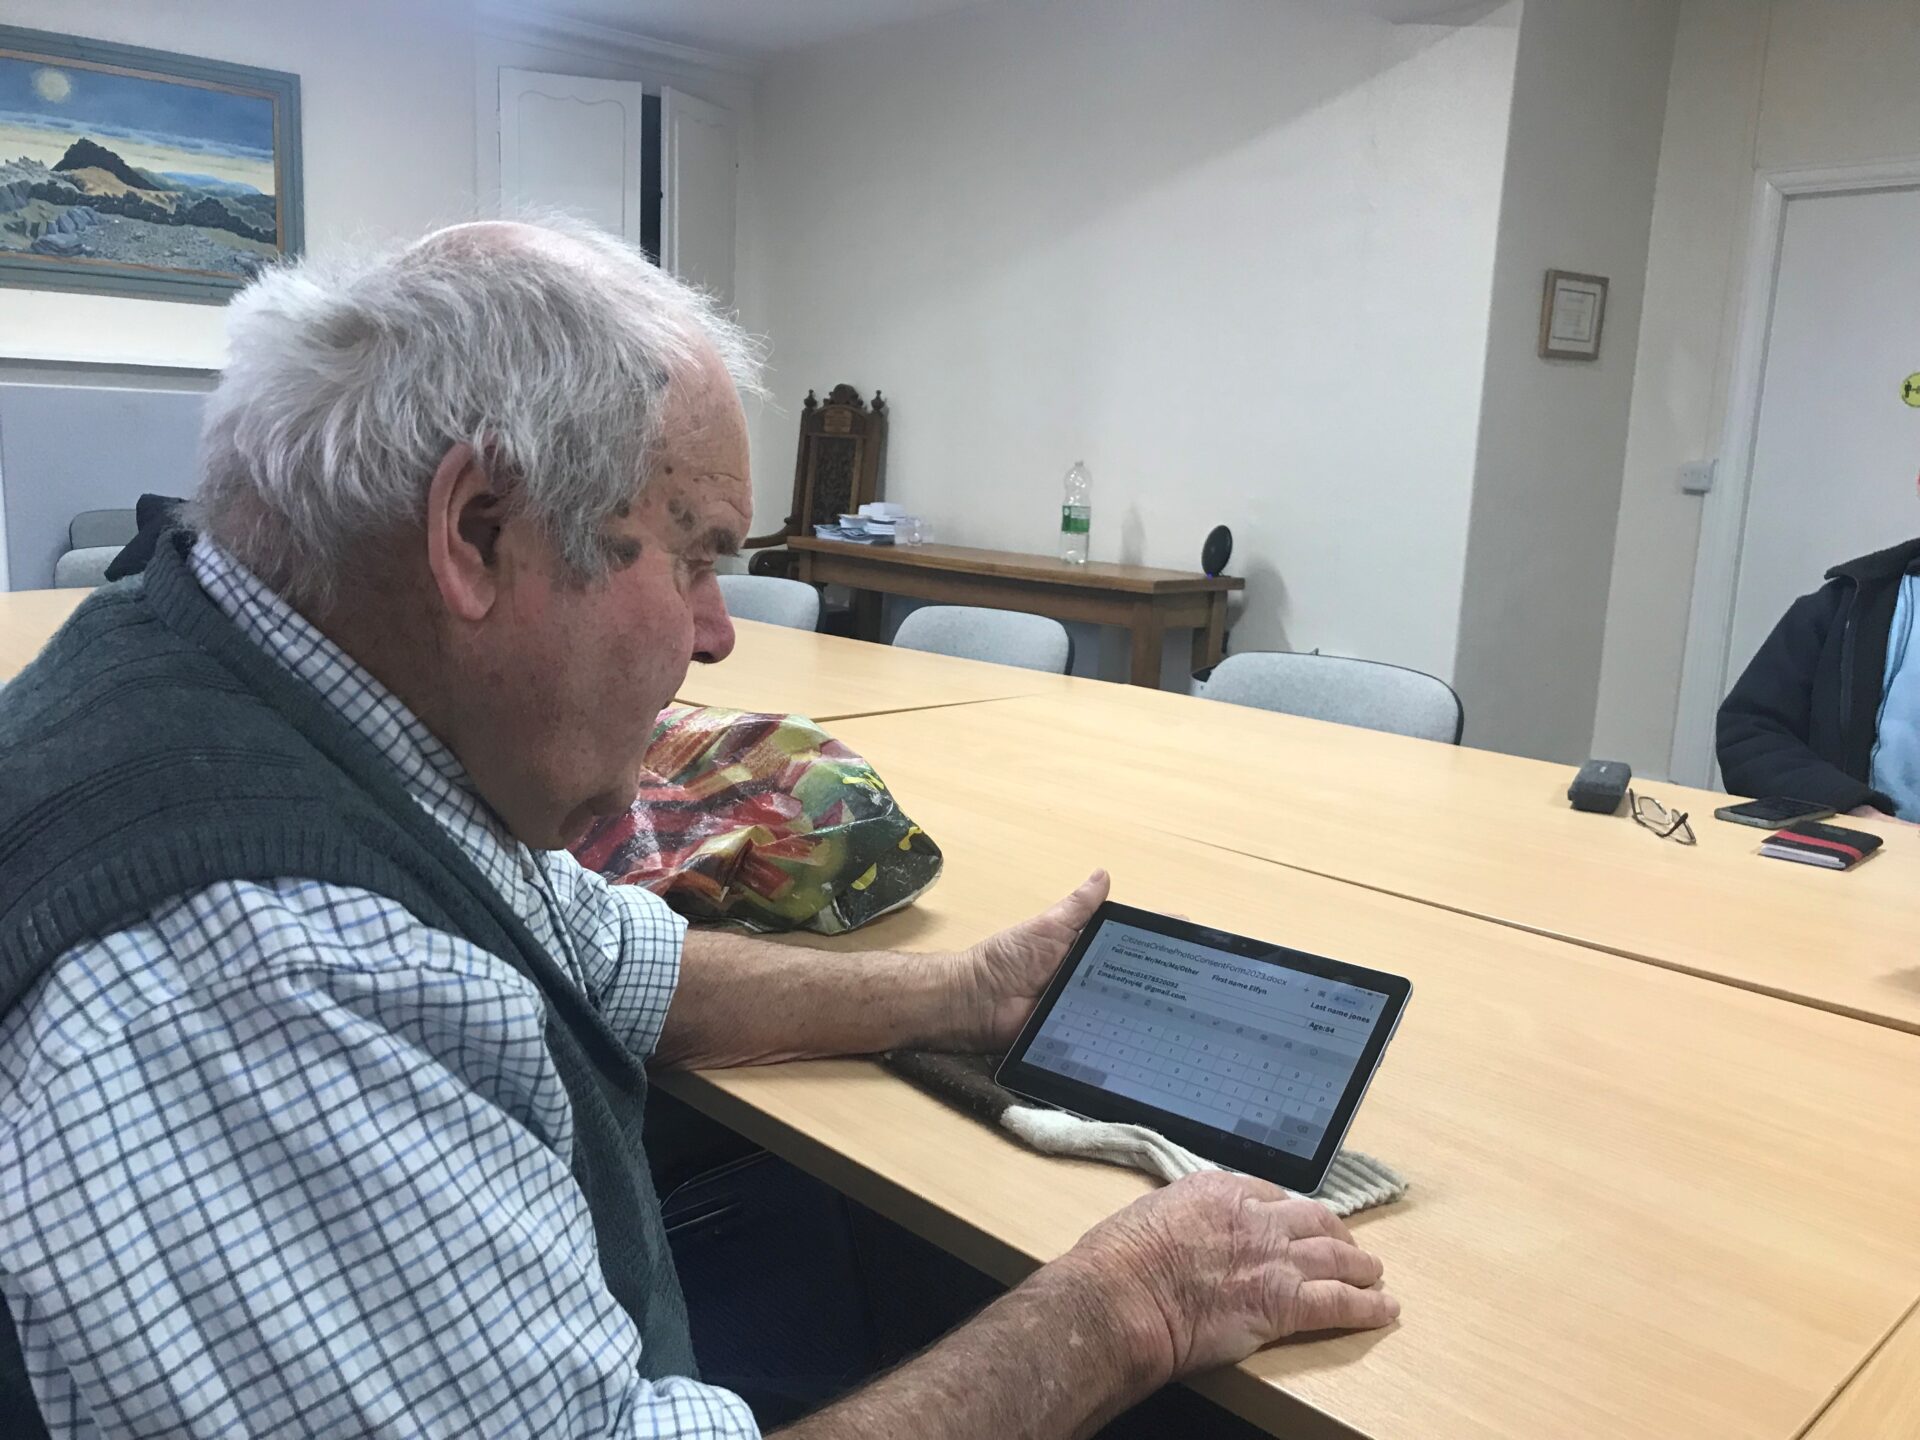 84 year old Mr Jones, using a tablet